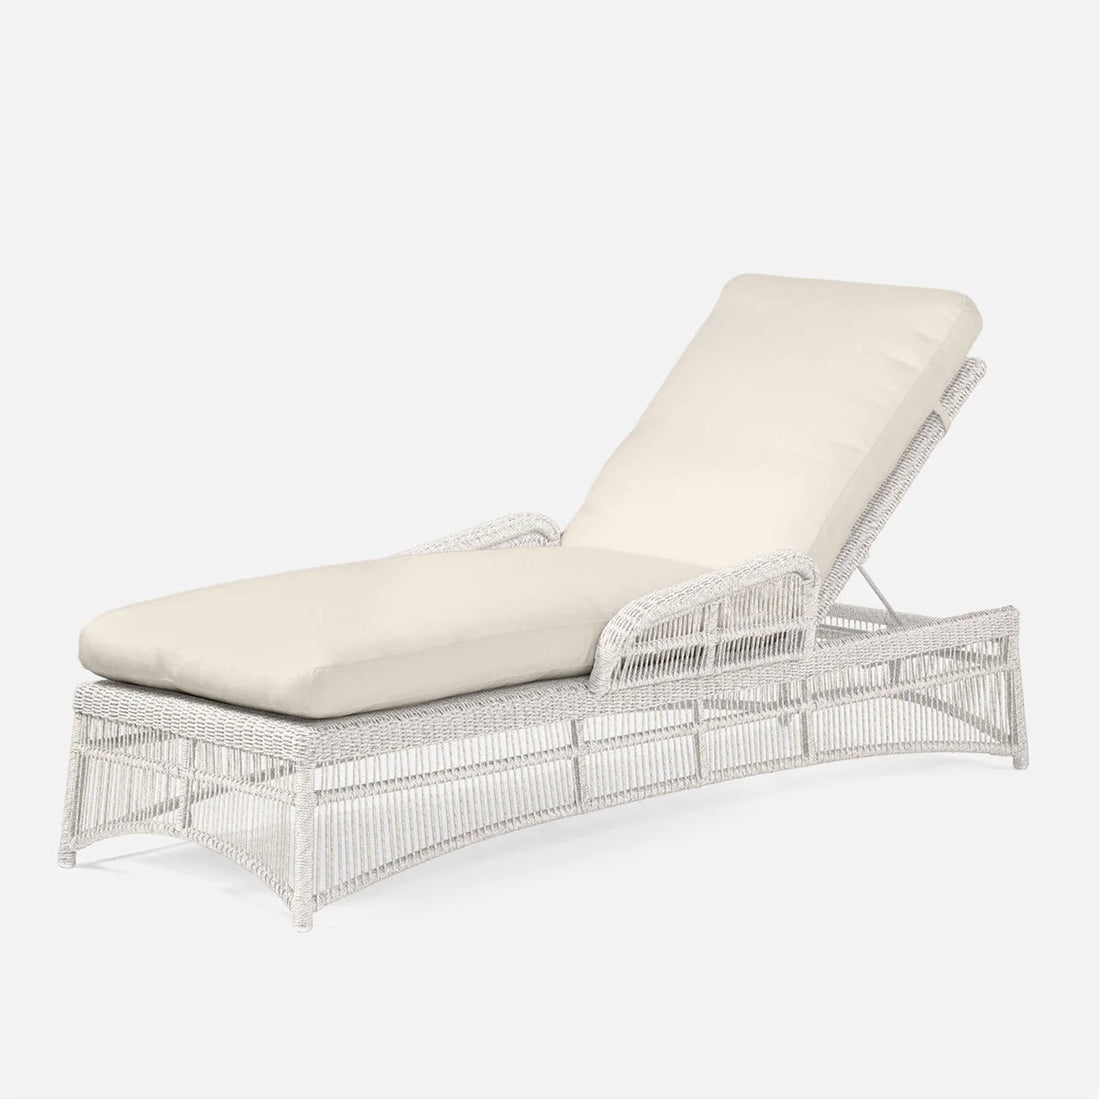 Made Goods Soma Outdoor Chaise Lounge in Danube Fabric